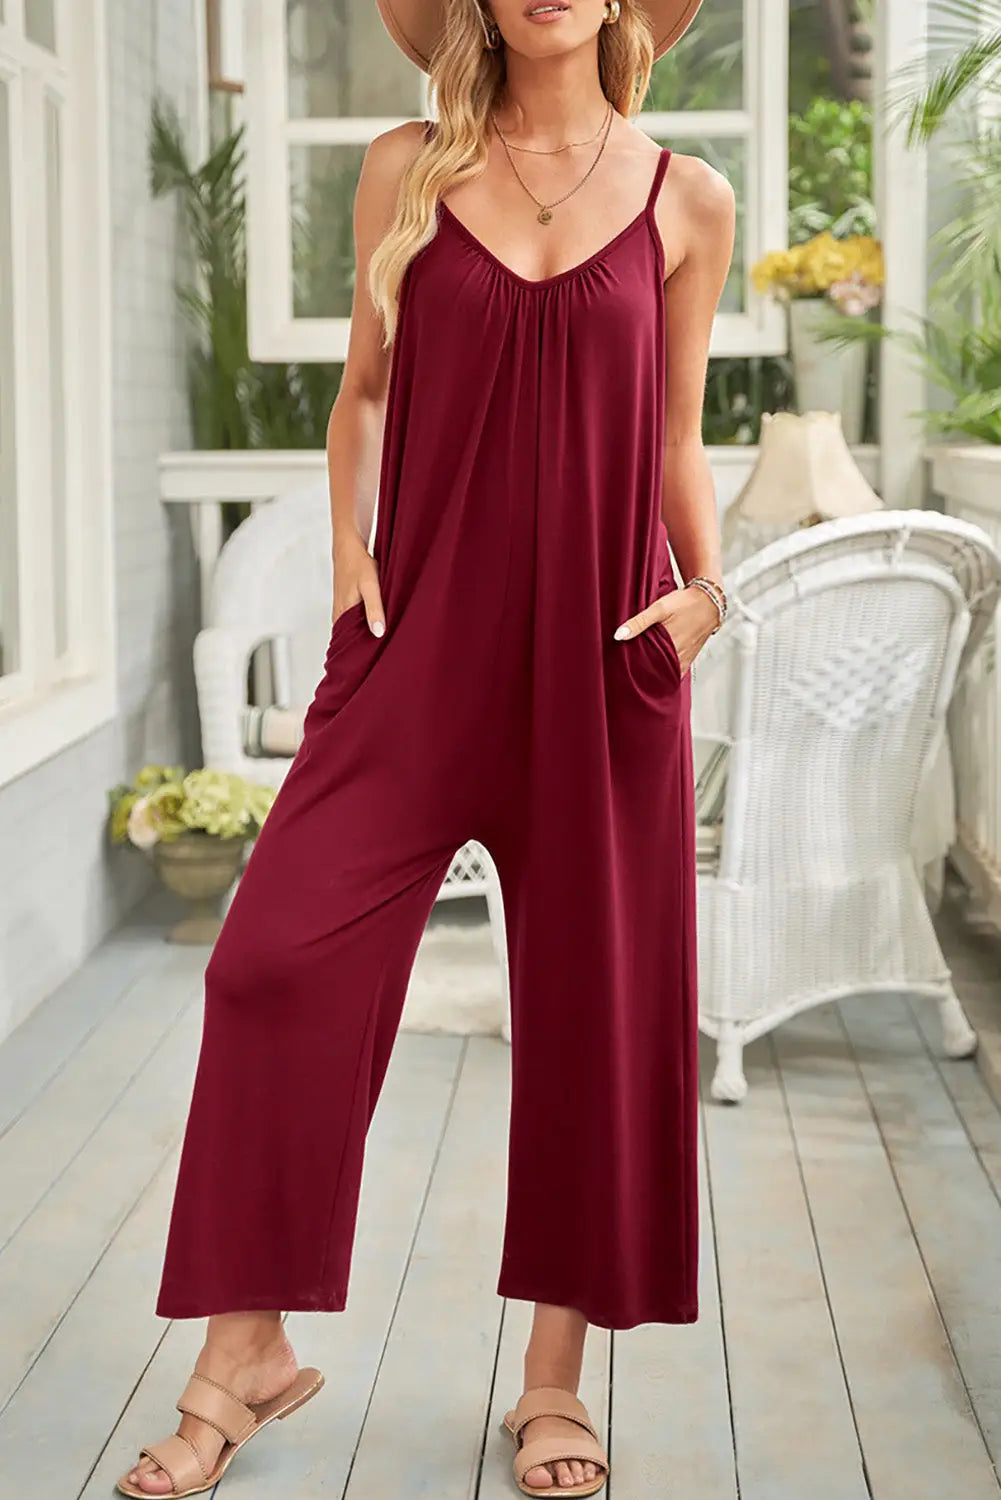 Pink red spaghetti straps wide leg pocketed jumpsuits - s / 95% polyester + 5% spandex - & rompers